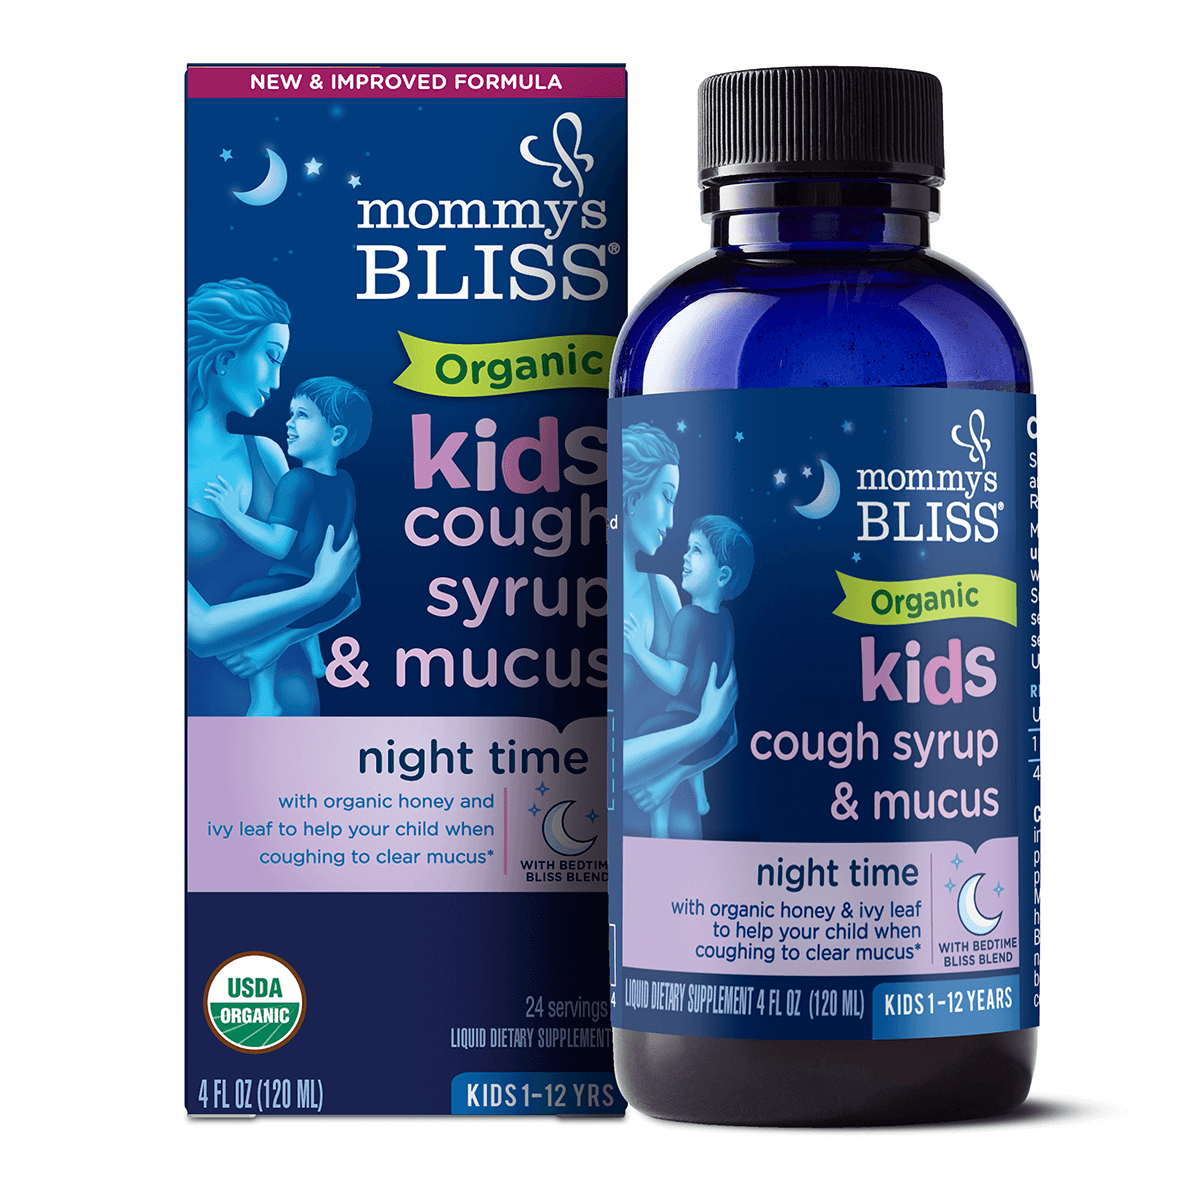 How to Sleep with a Cough: 12 Tips for Nighttime Cough Relief